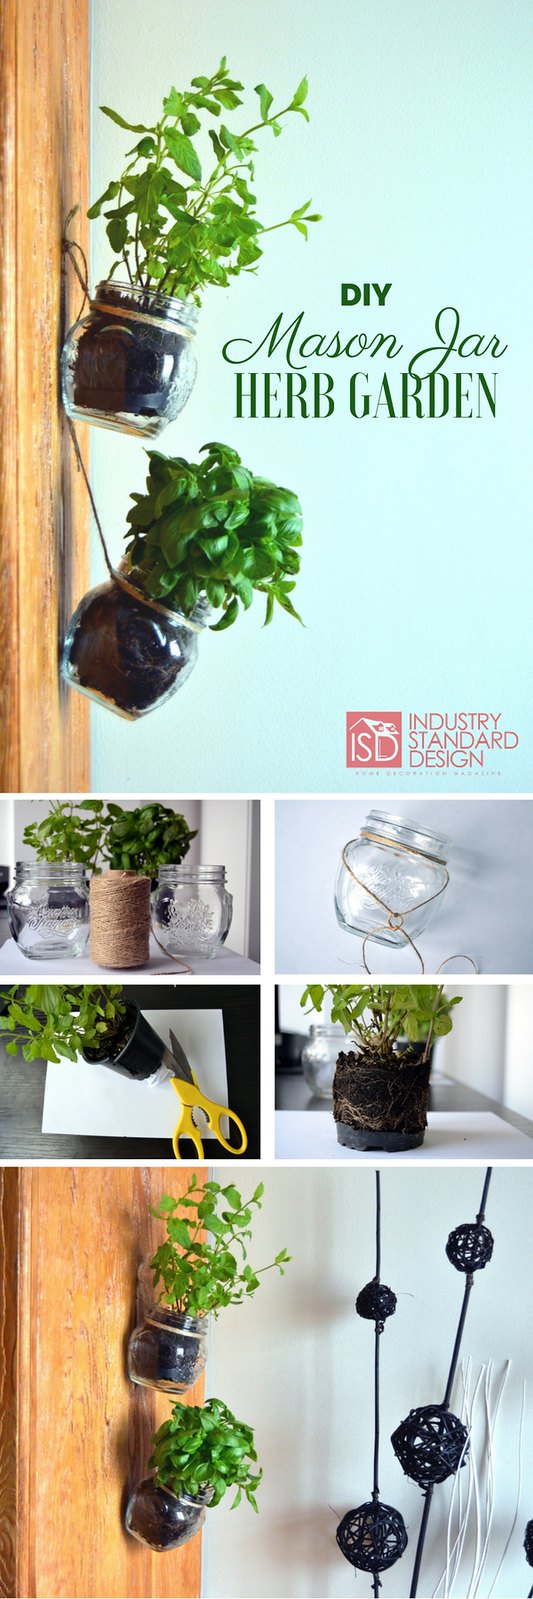 10 Ingenious DIY Decor Tricks You've Never Thought Of